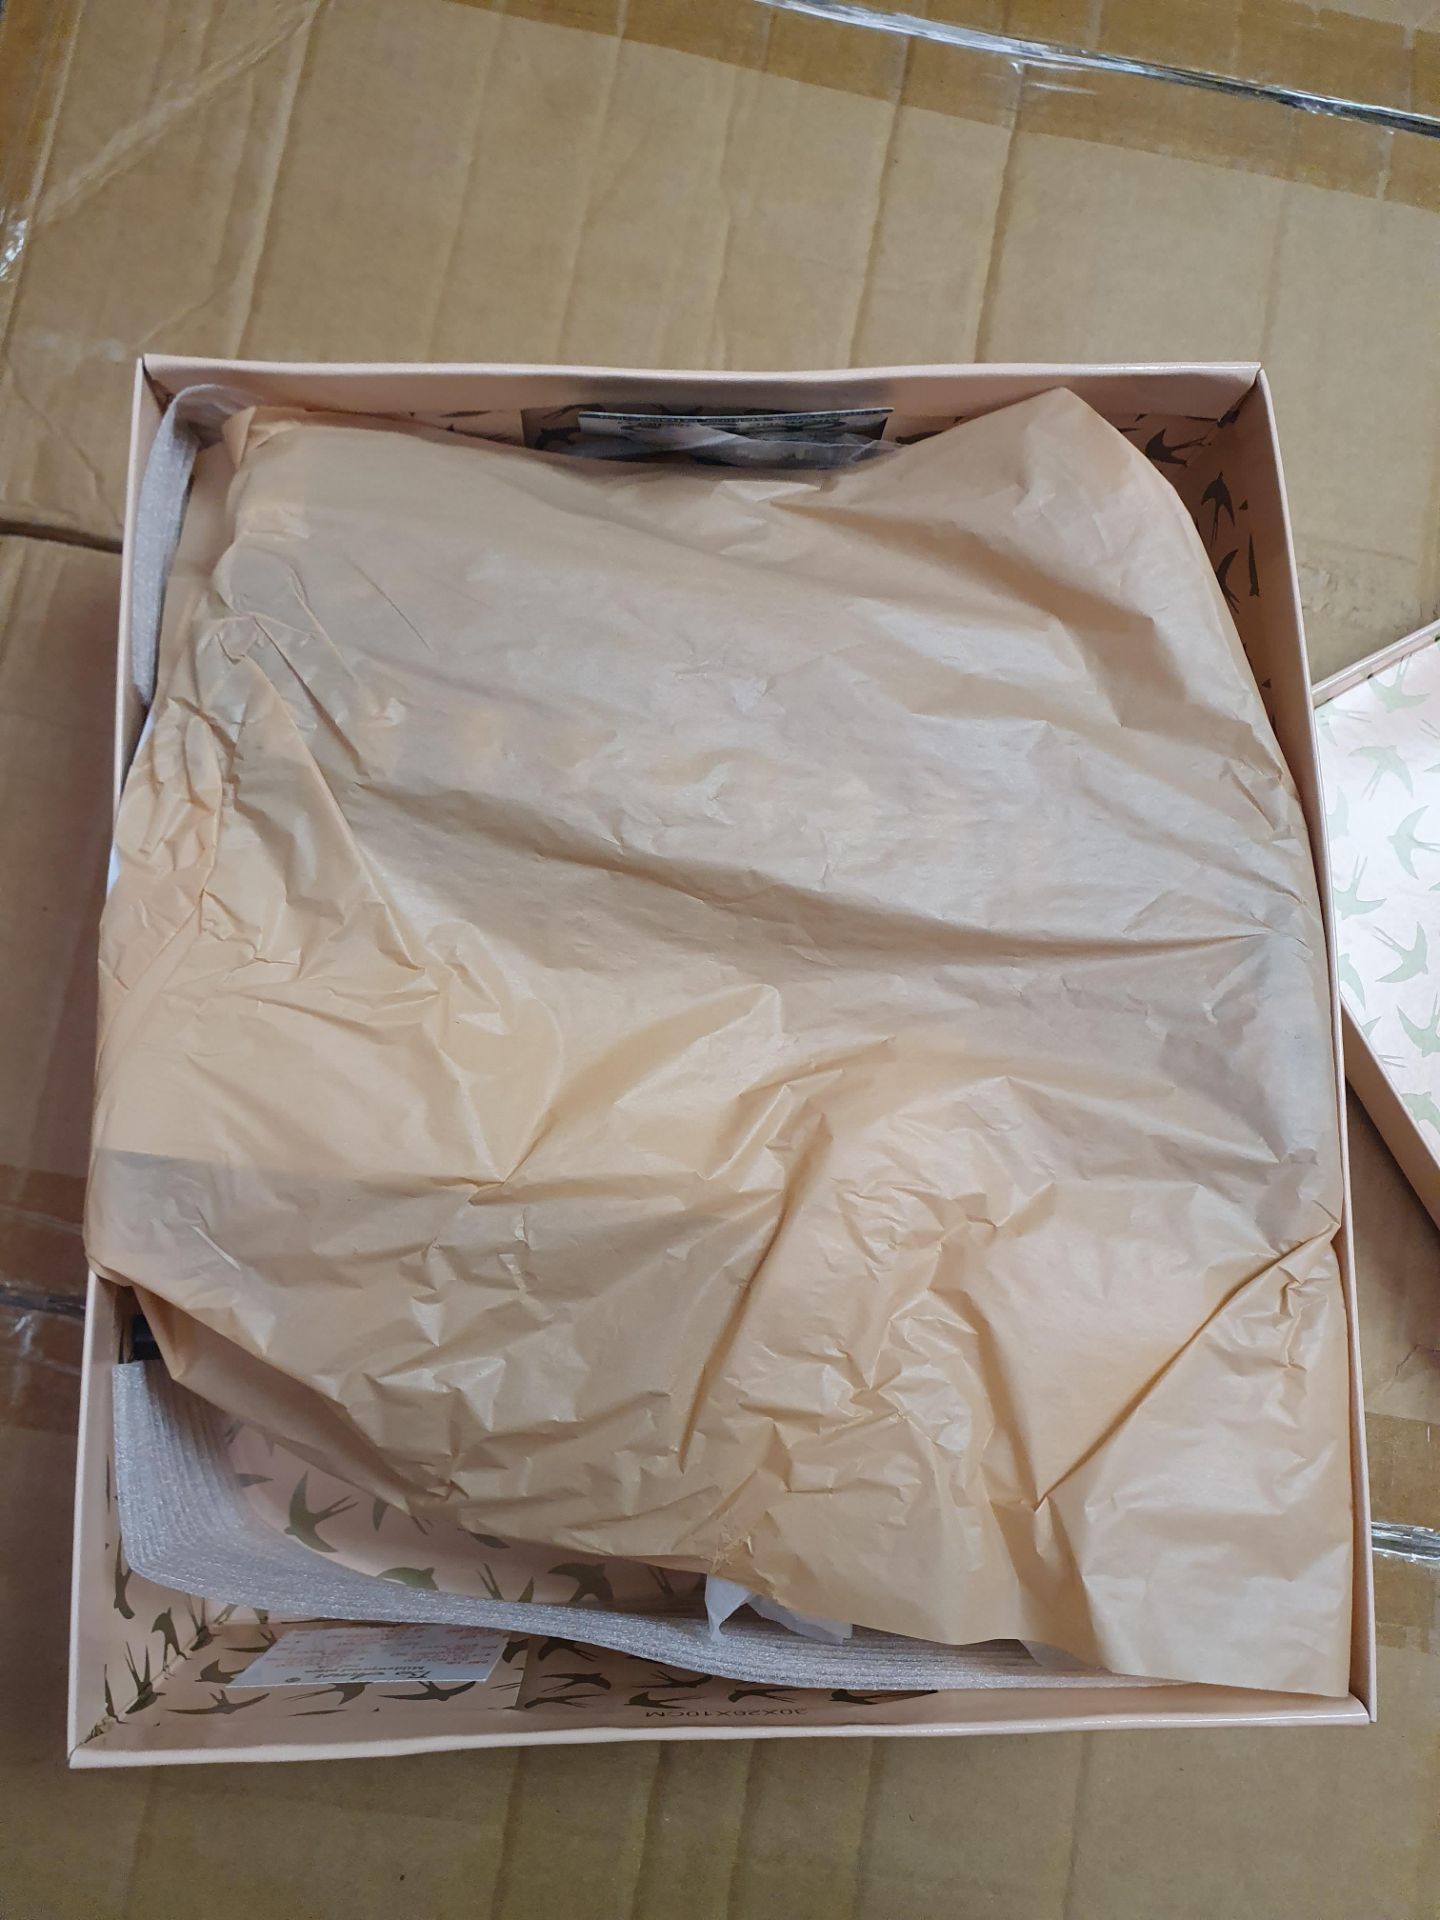 Pallet of 156 Pairs of Assorted Shoes - New/Boxed - CL907 - Ref: Pallet3 - Location: Chadderton - Image 14 of 14